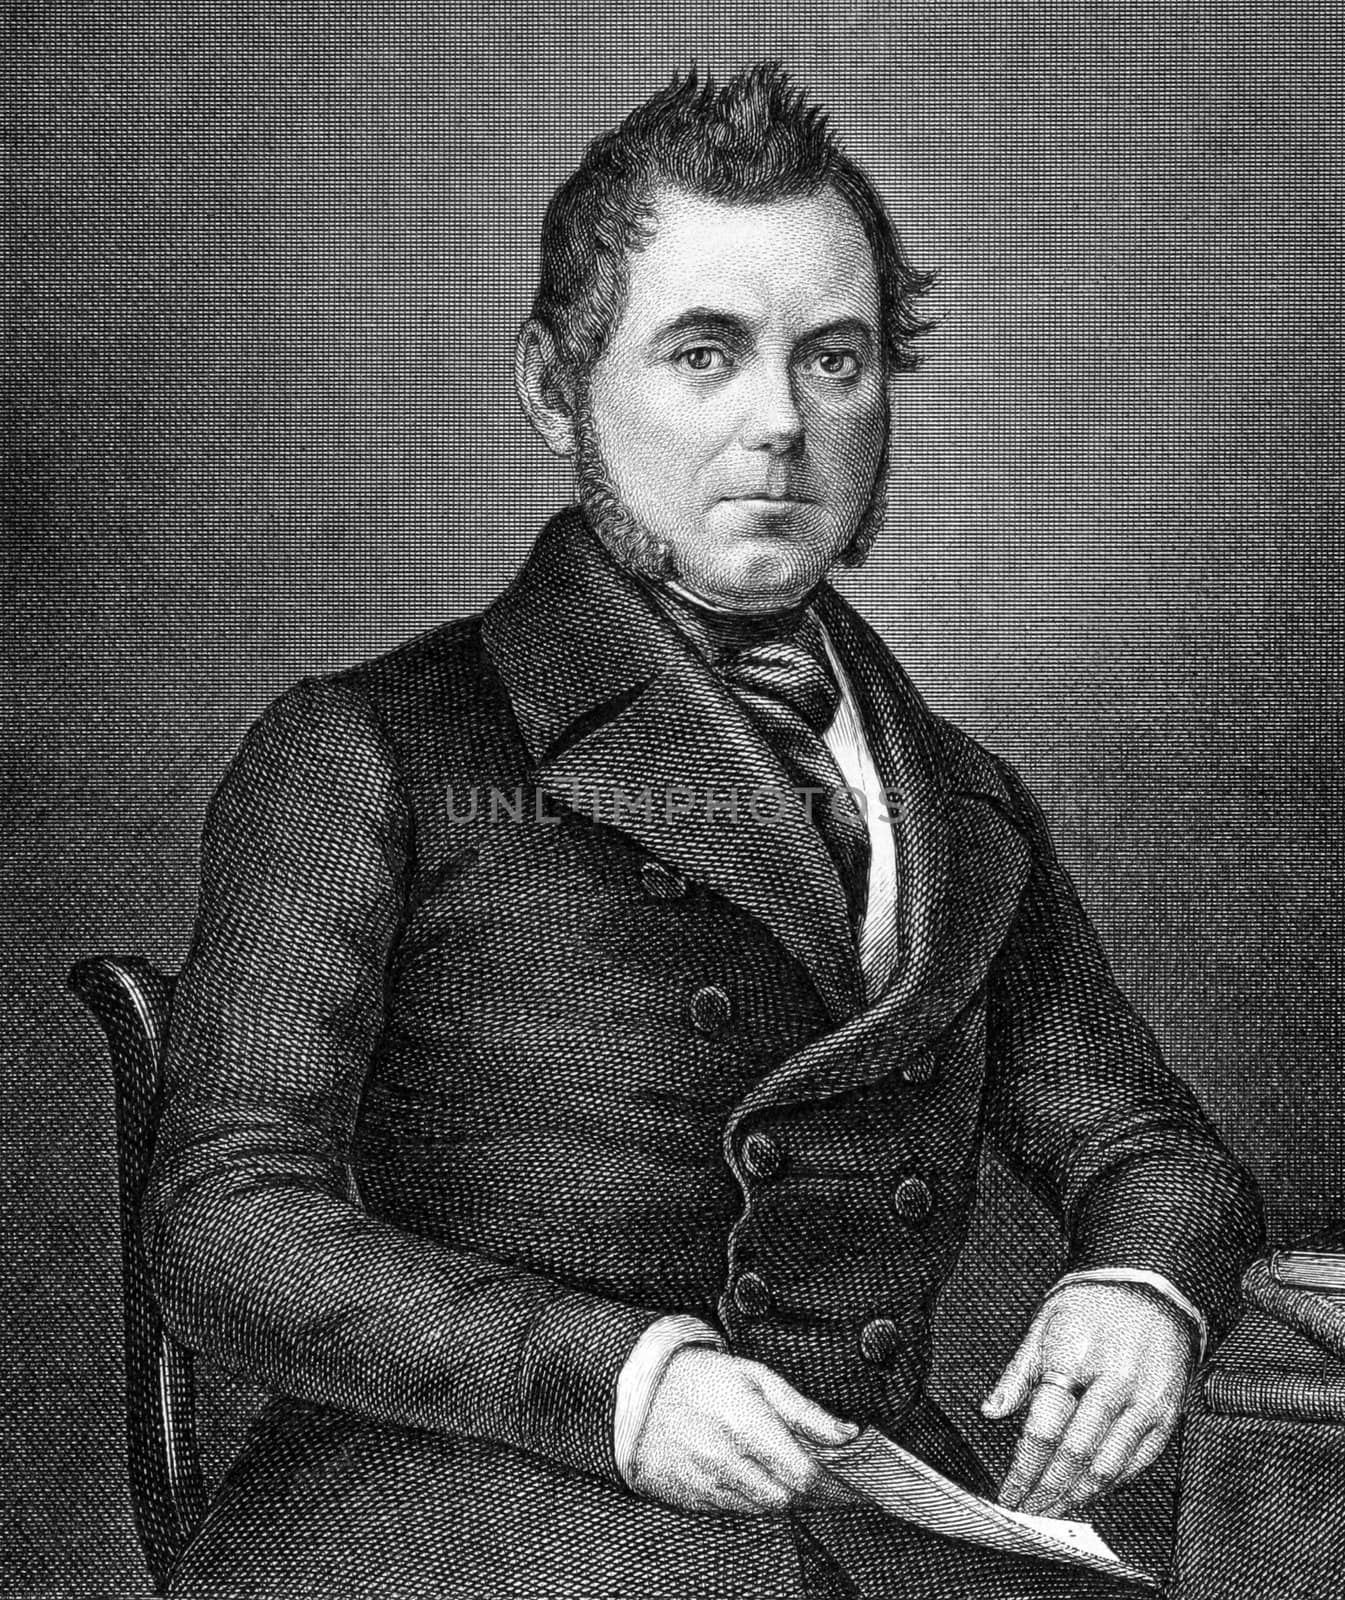 Robert von Mohl (1799-1875) on engraving from 1859. German jurist. Engraved by Barfus and published in Meyers Konversations-Lexikon, Germany,1859.